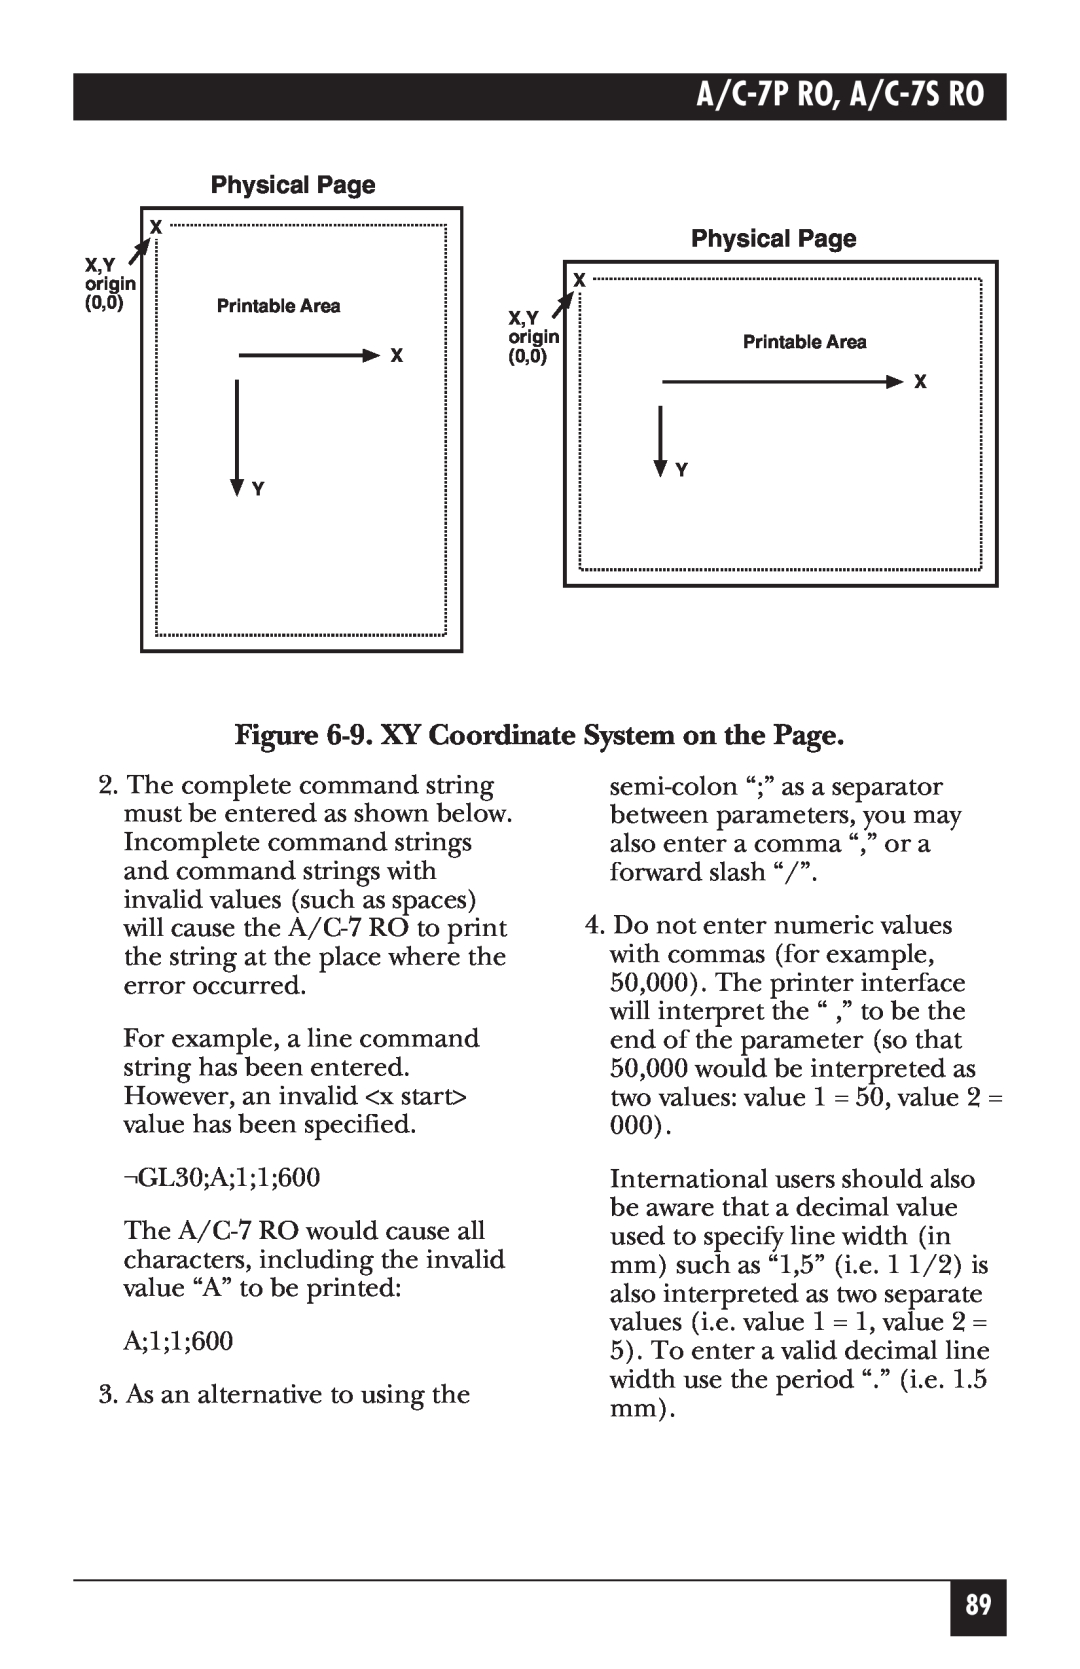 Black Box manual 9. XY Coordinate System on the Page, A/C-7P RO, A/C-7S RO 